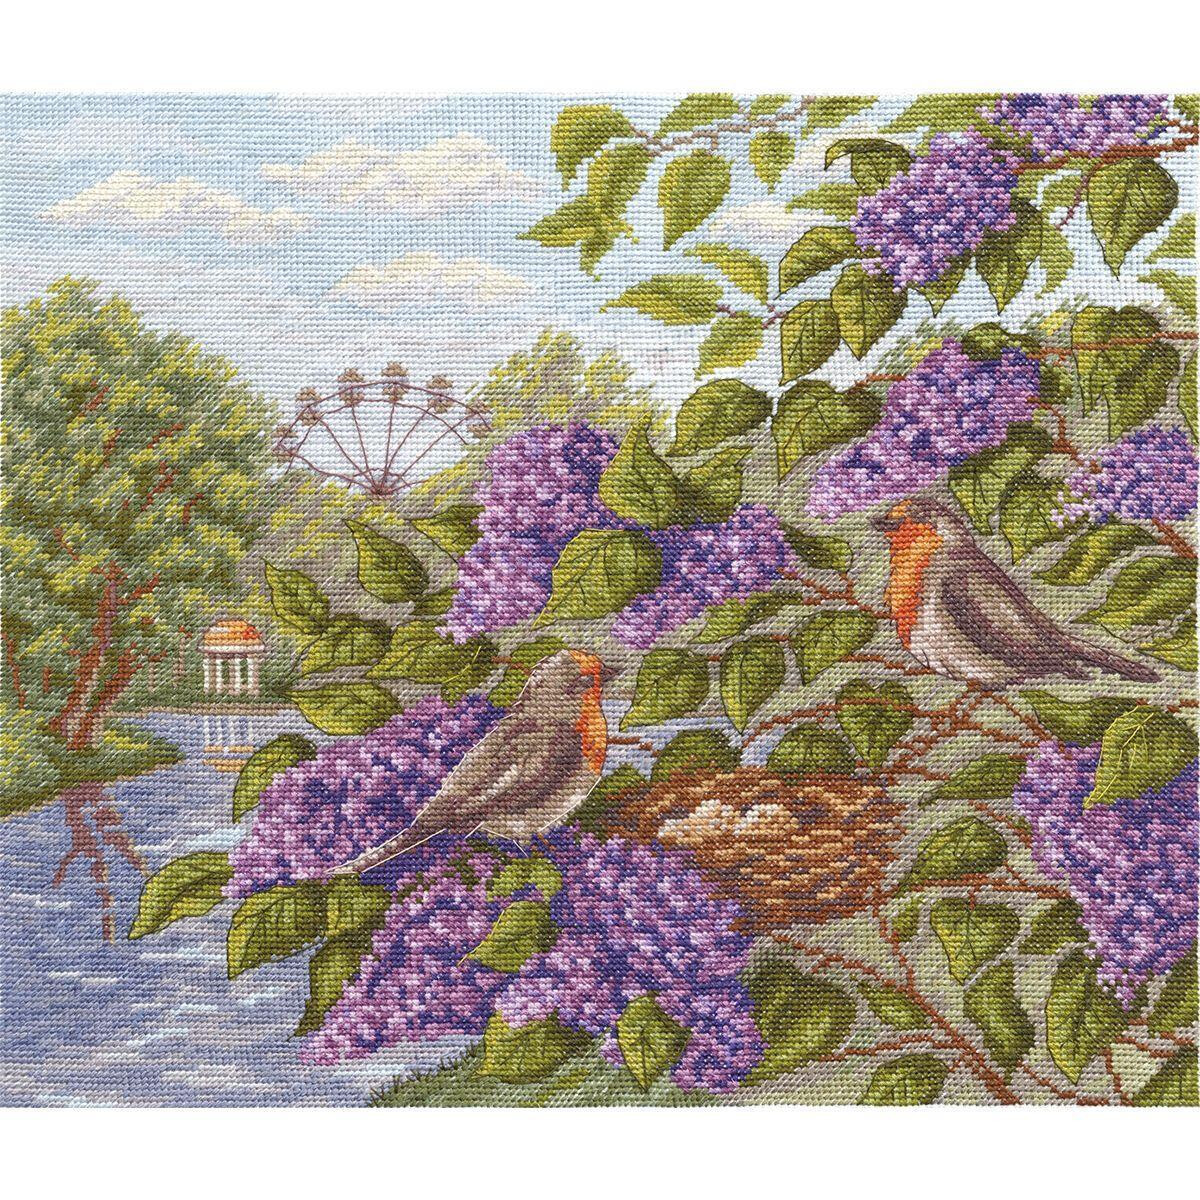 Panna counted cross stitch kit "Lilac in the Old...